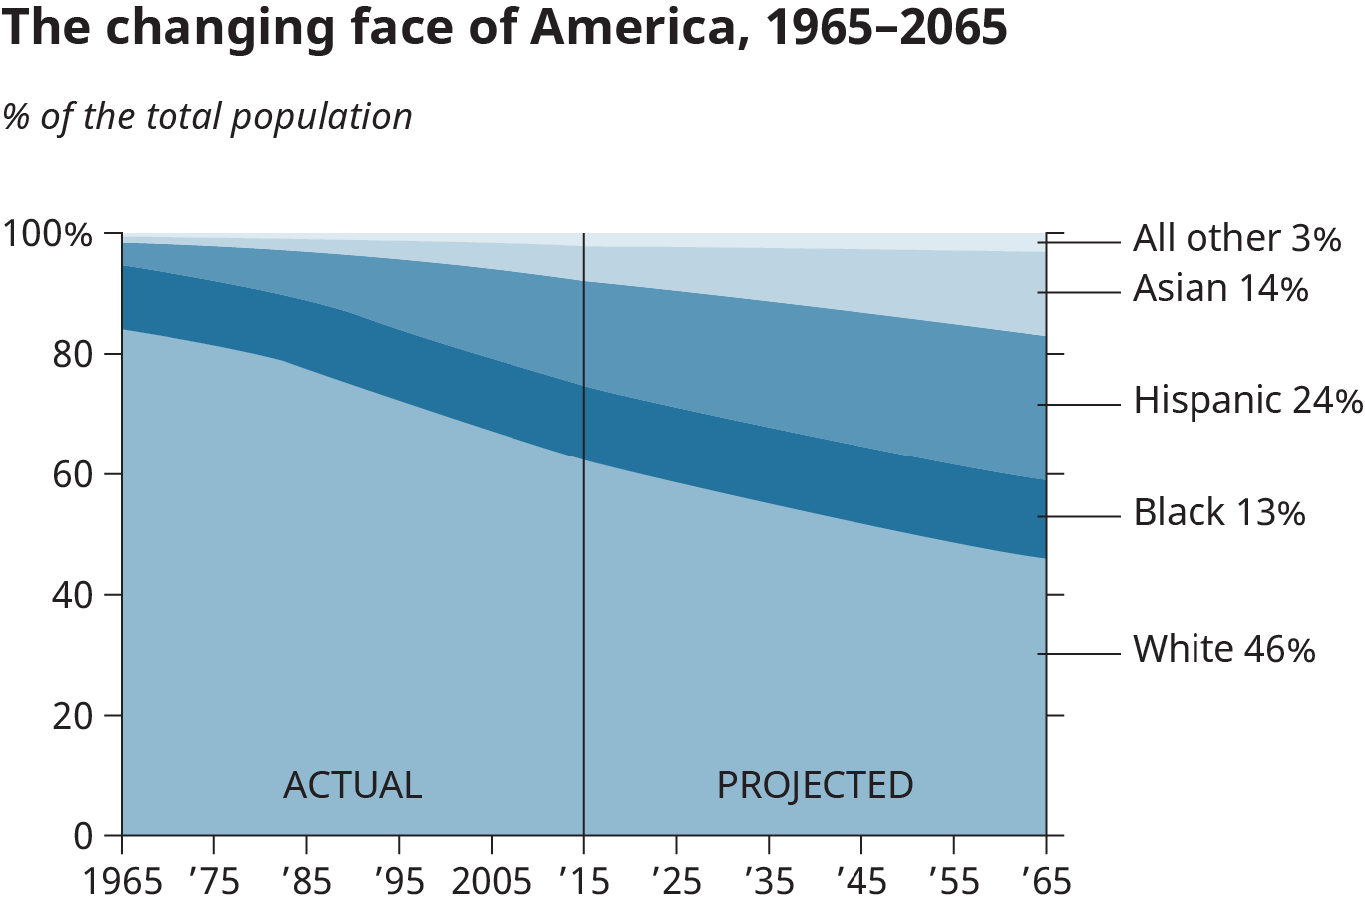 A graphical representation shows the actual and projected percentage of total population of America over the years.